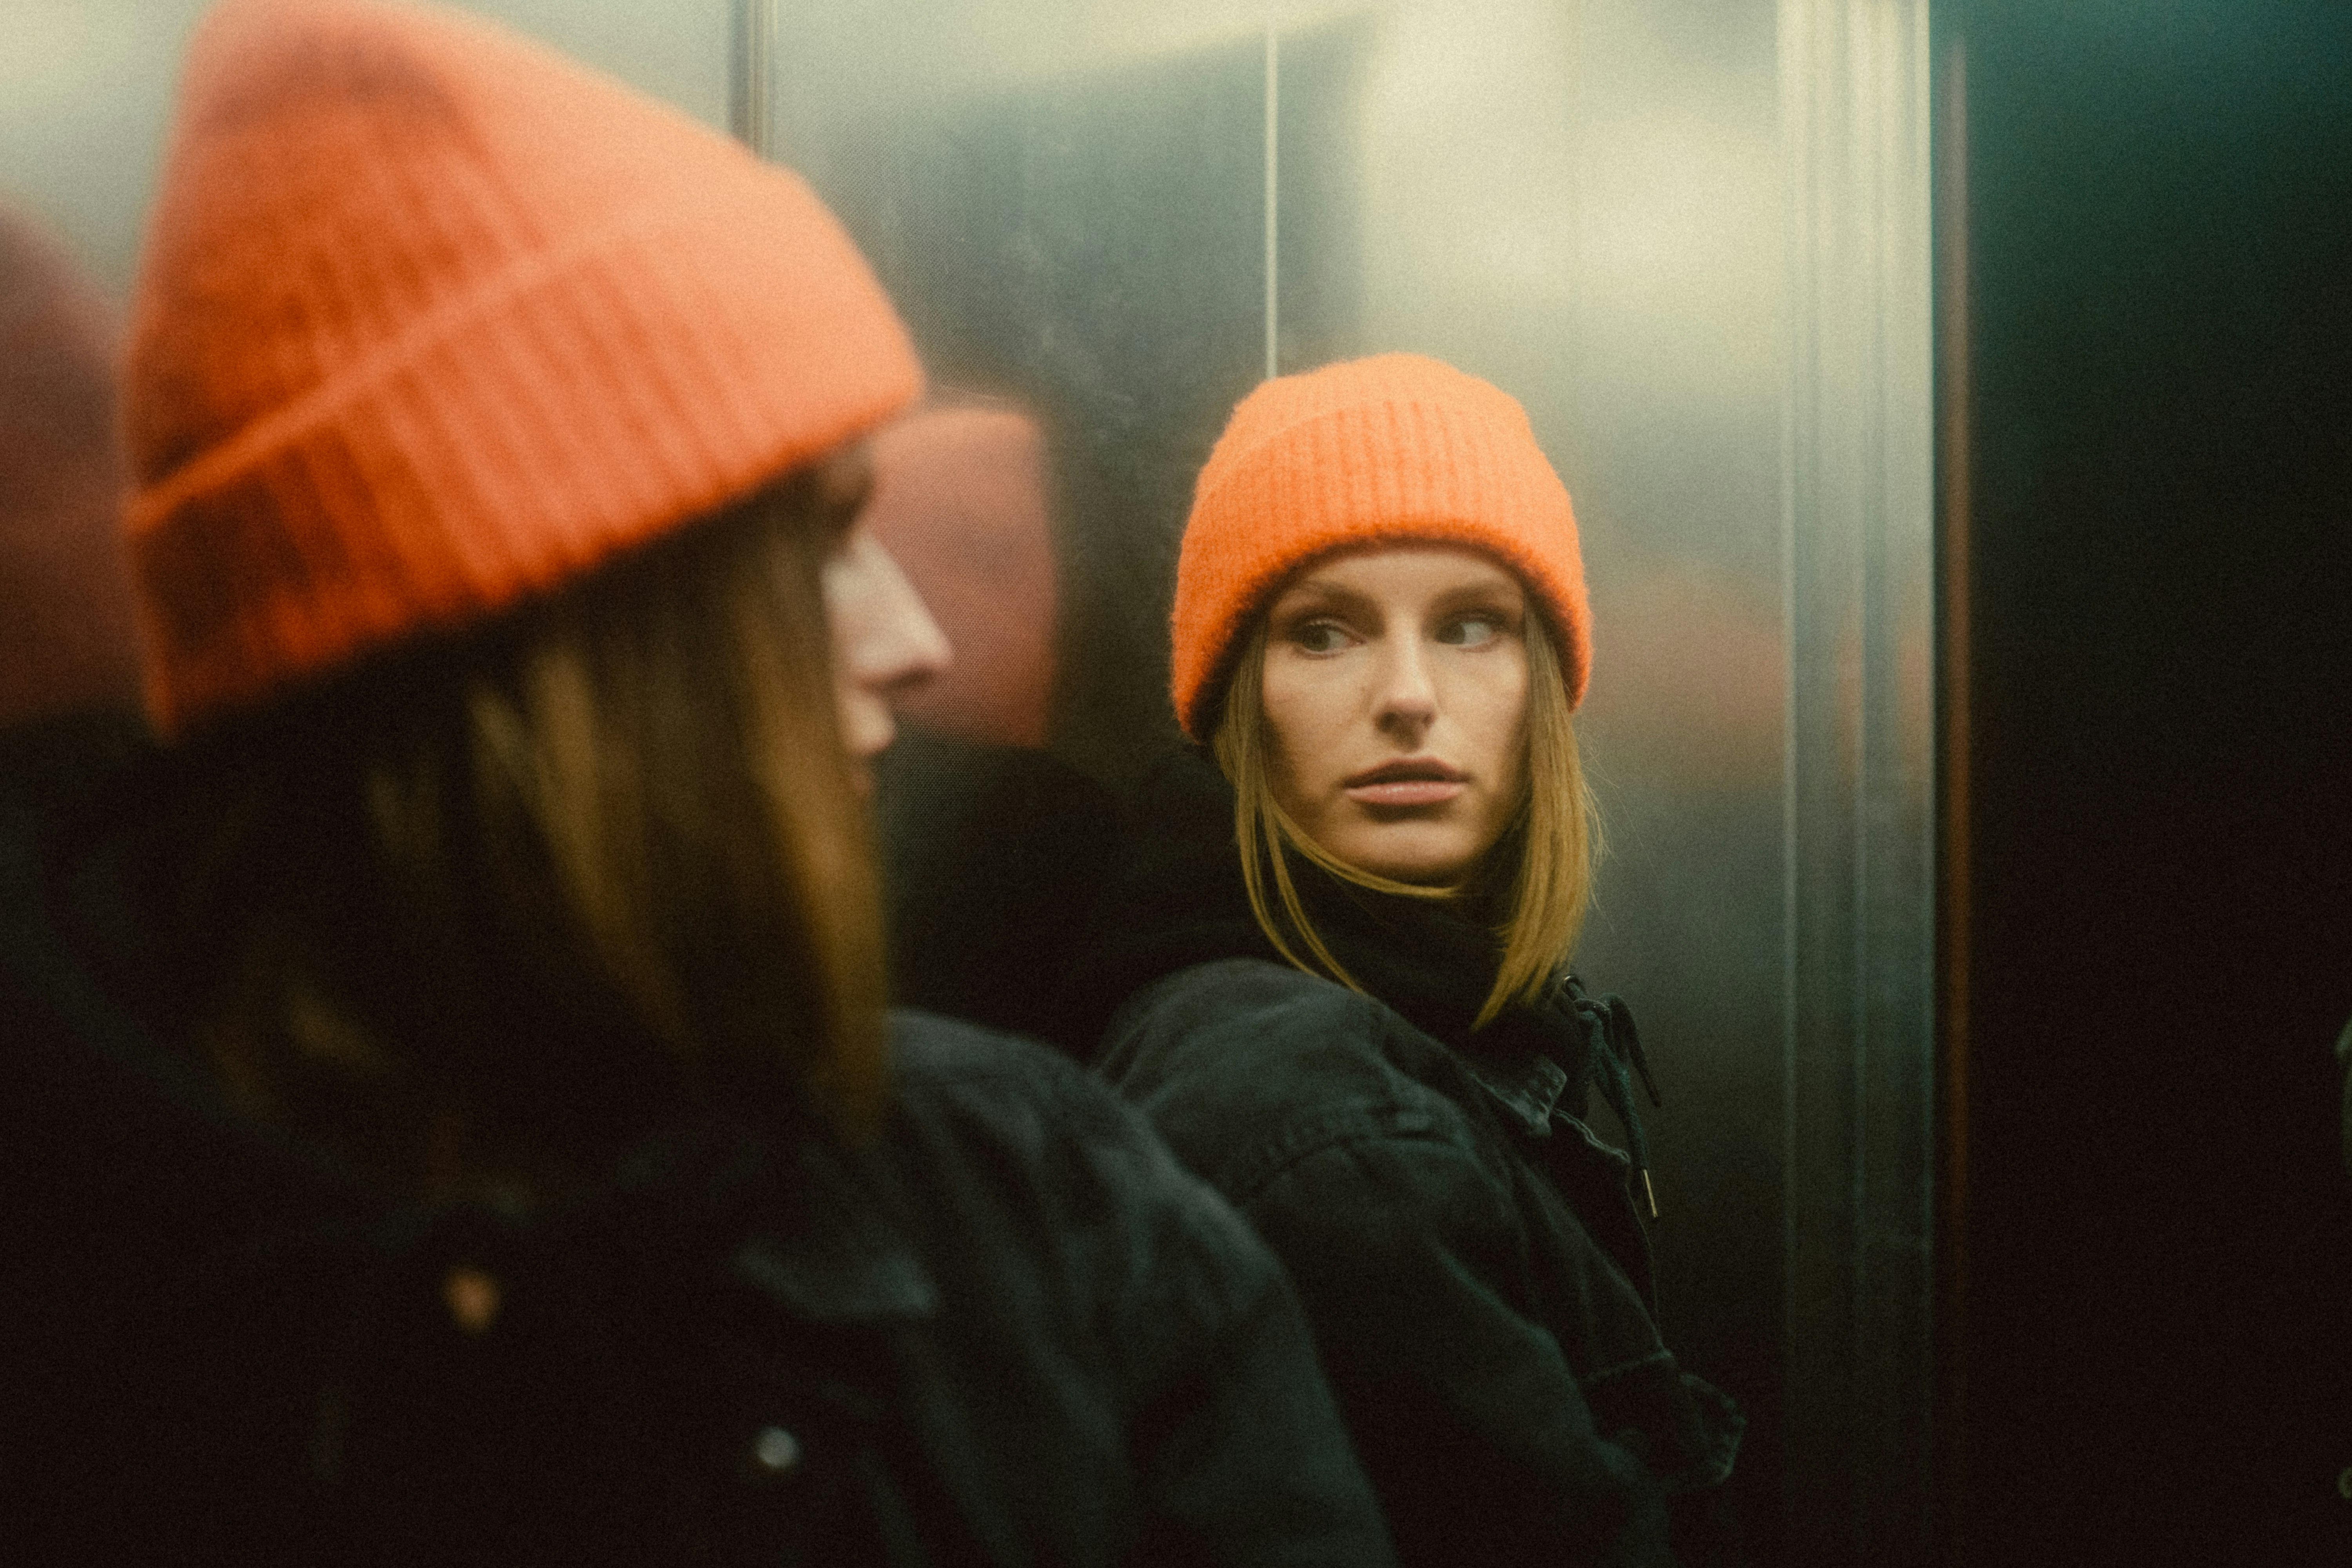 woman in orange knit cap and black jacket